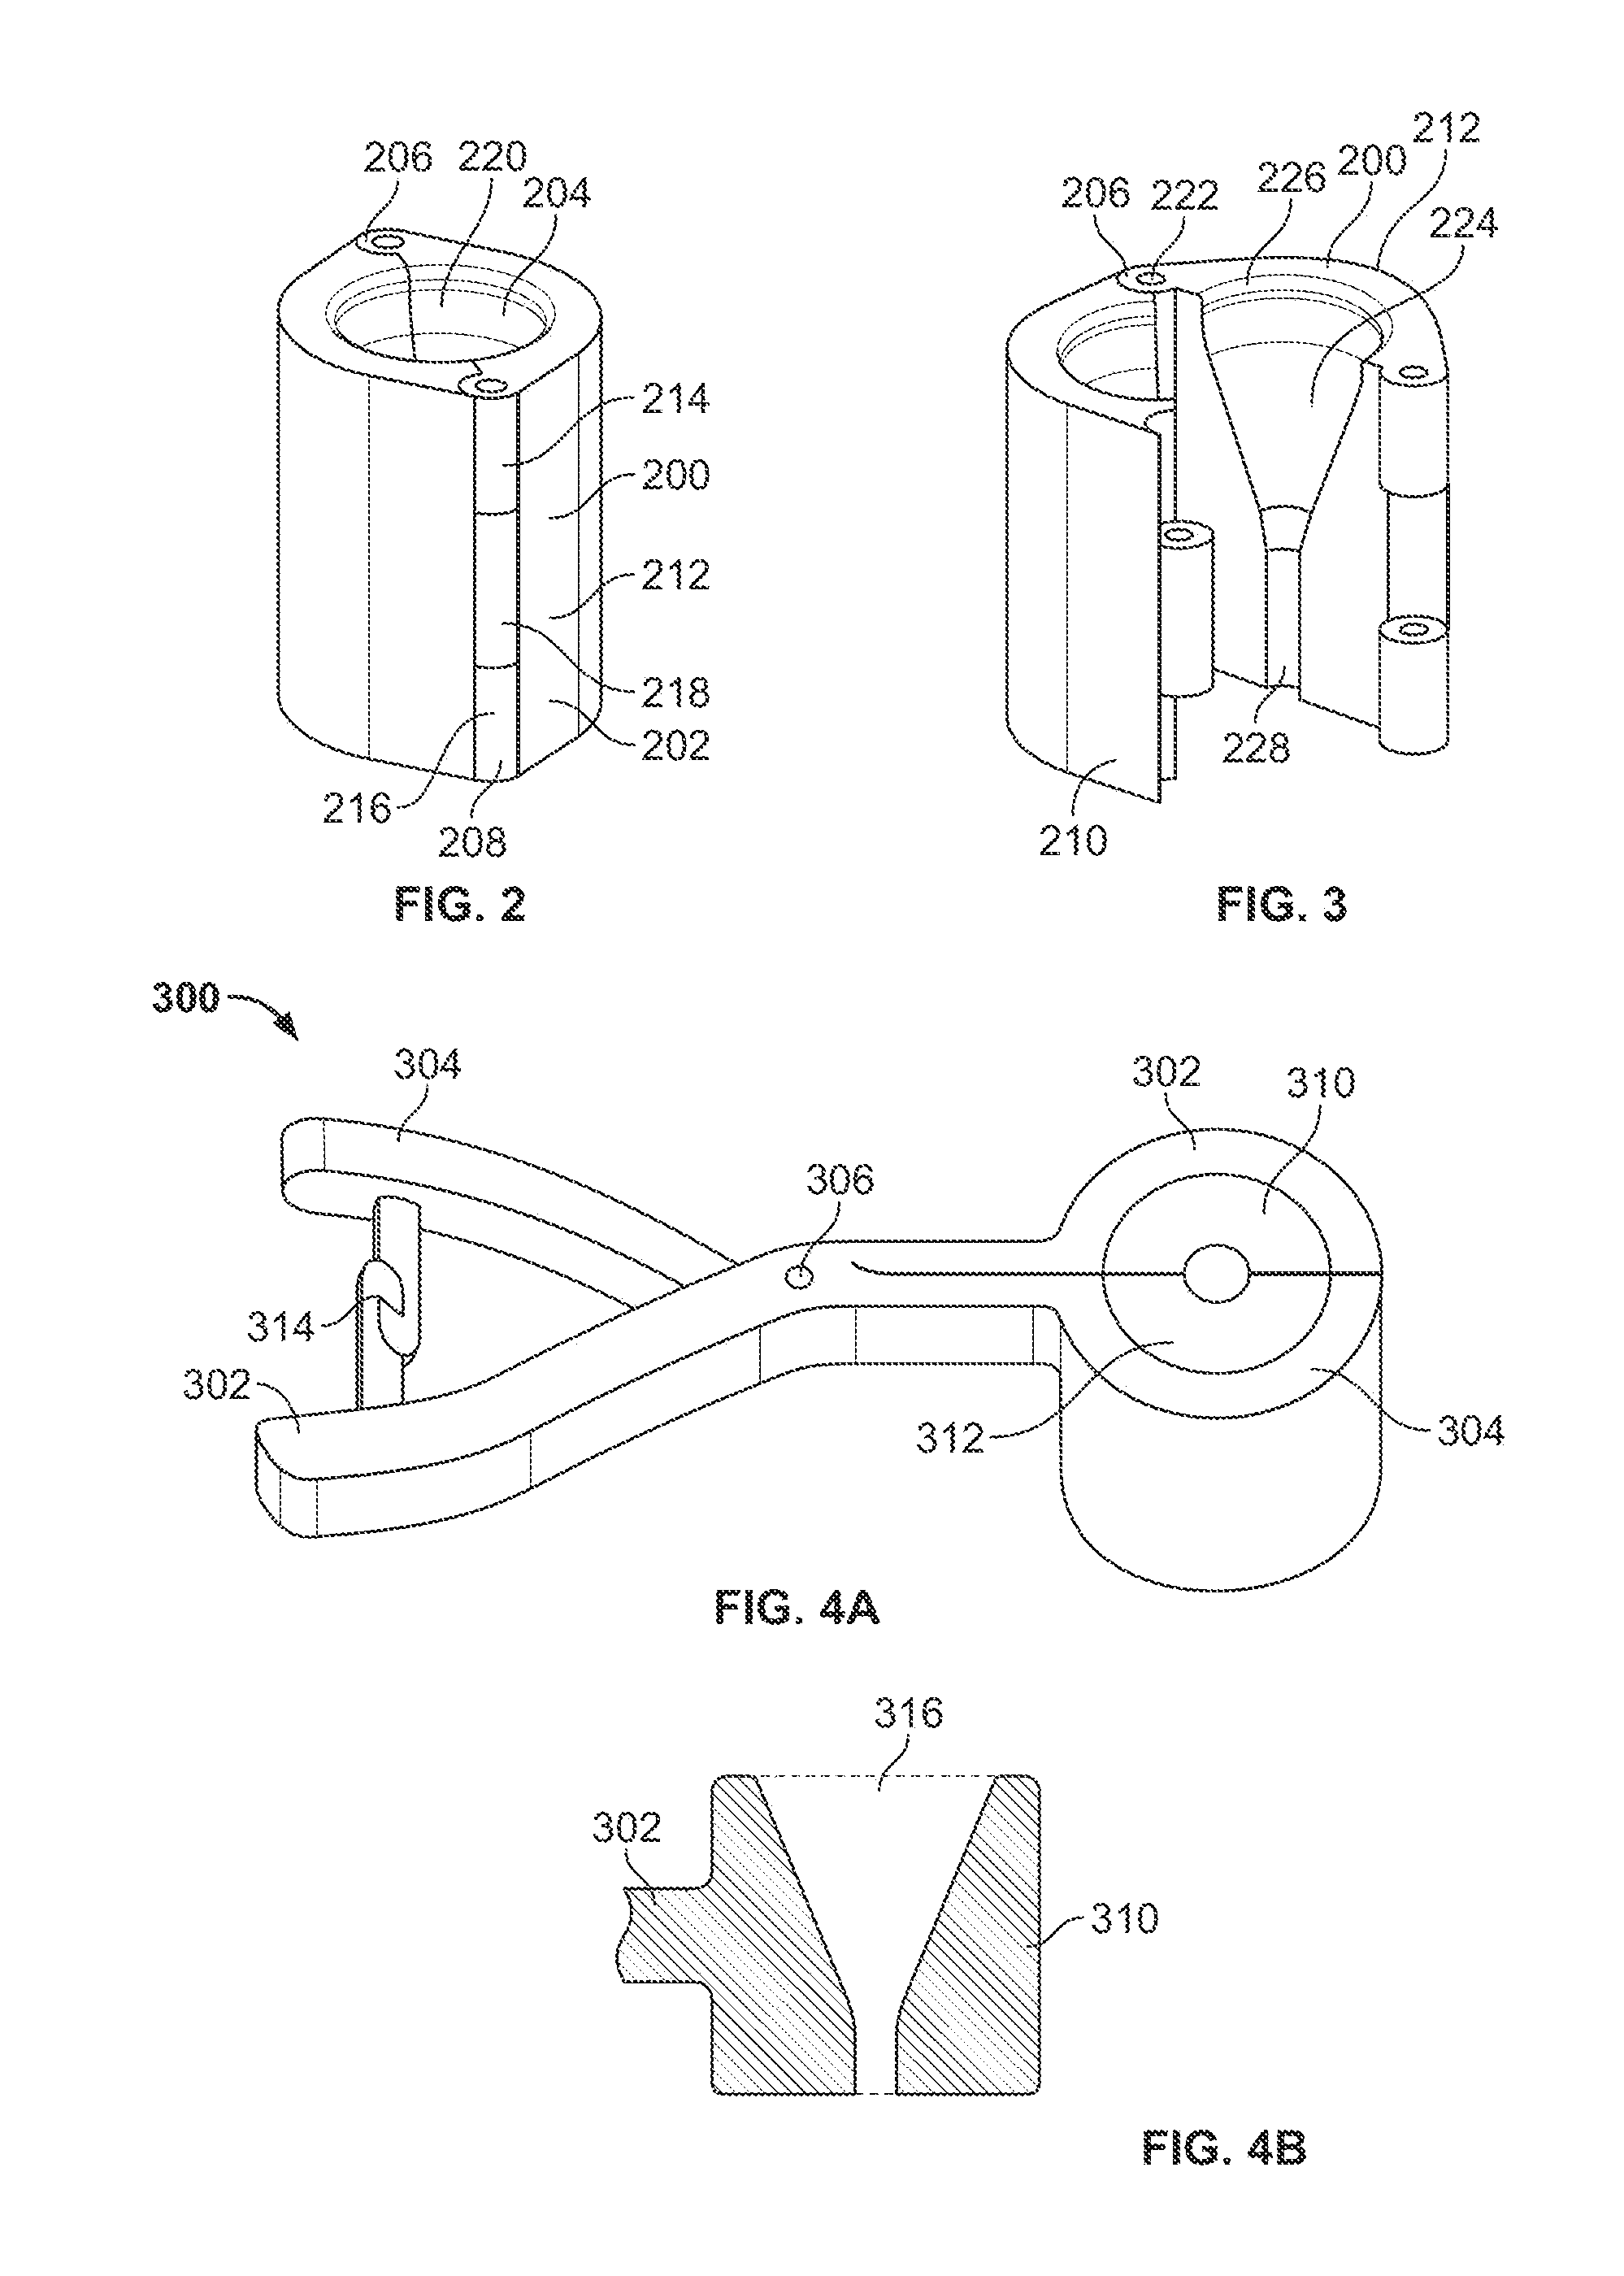 Device for collapsing and loading a heart valve into a minimally invasive delivery system